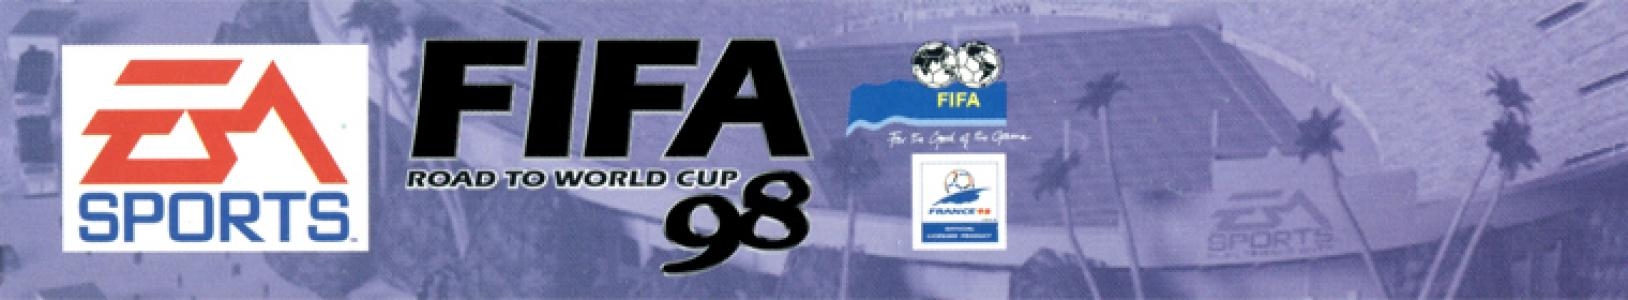 FIFA Road to World Cup 98 banner